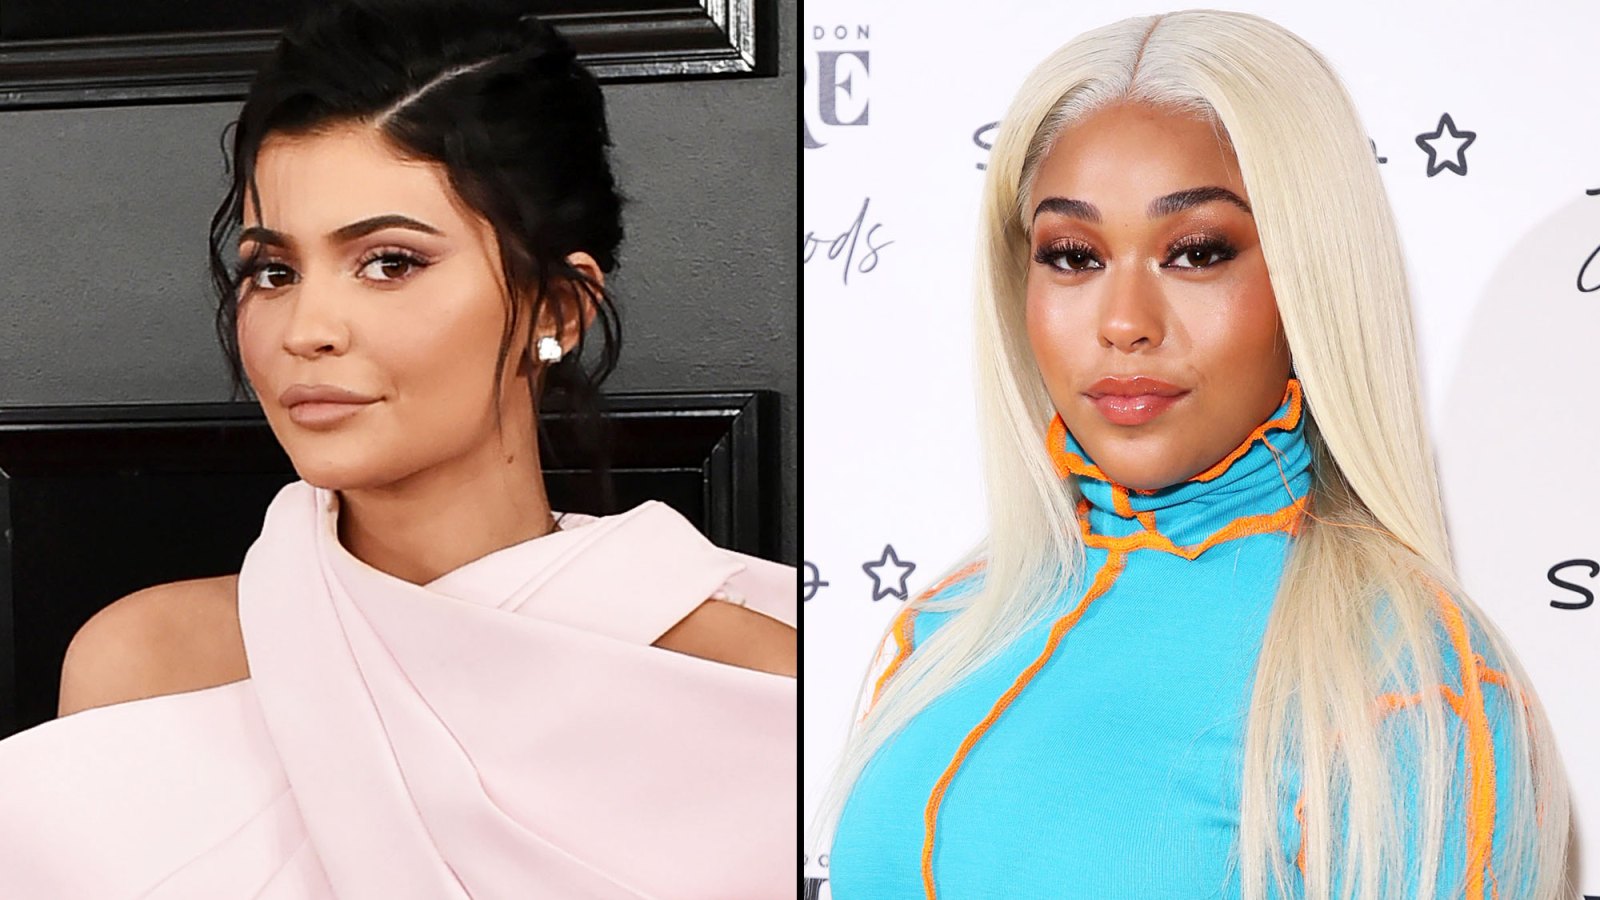 Kylie Jenner 'Still Isn't Over the Situation' With Jordyn Woods After Cheating Scandal: She 'Was Devastated'